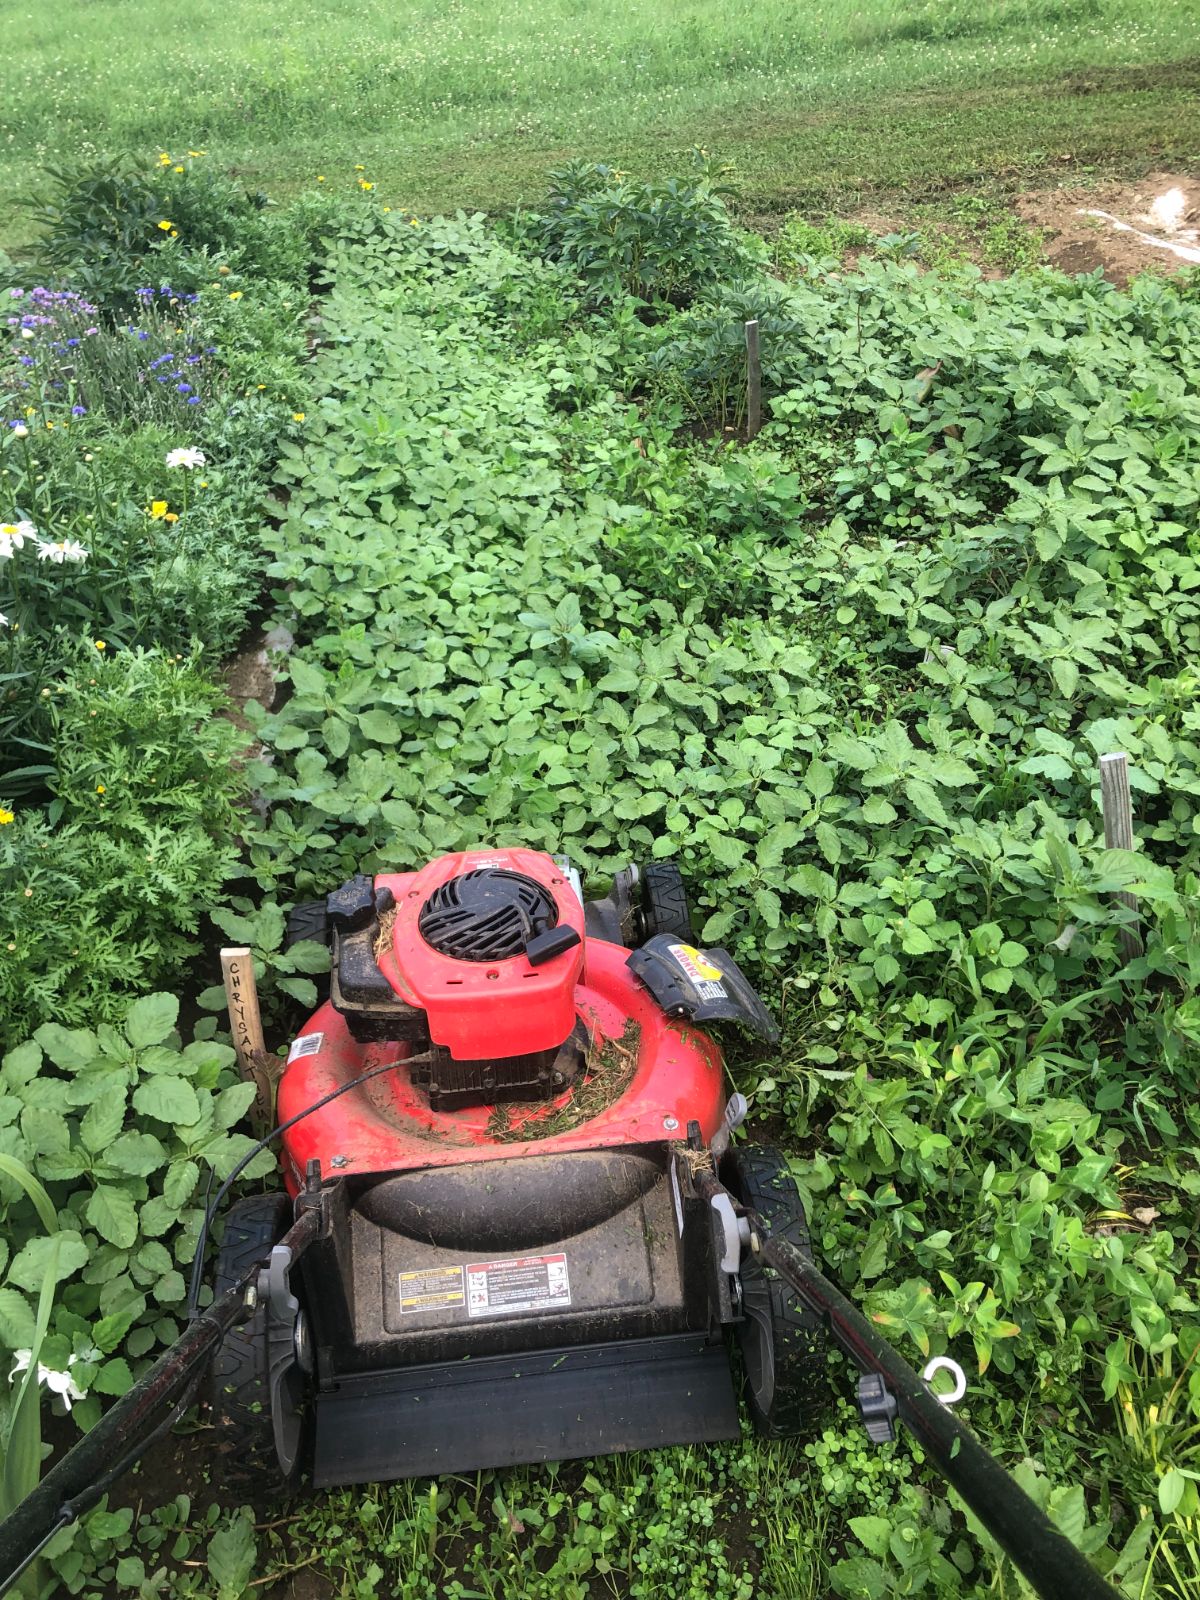 Mowable clover in garden aisles being mowed with a push mower